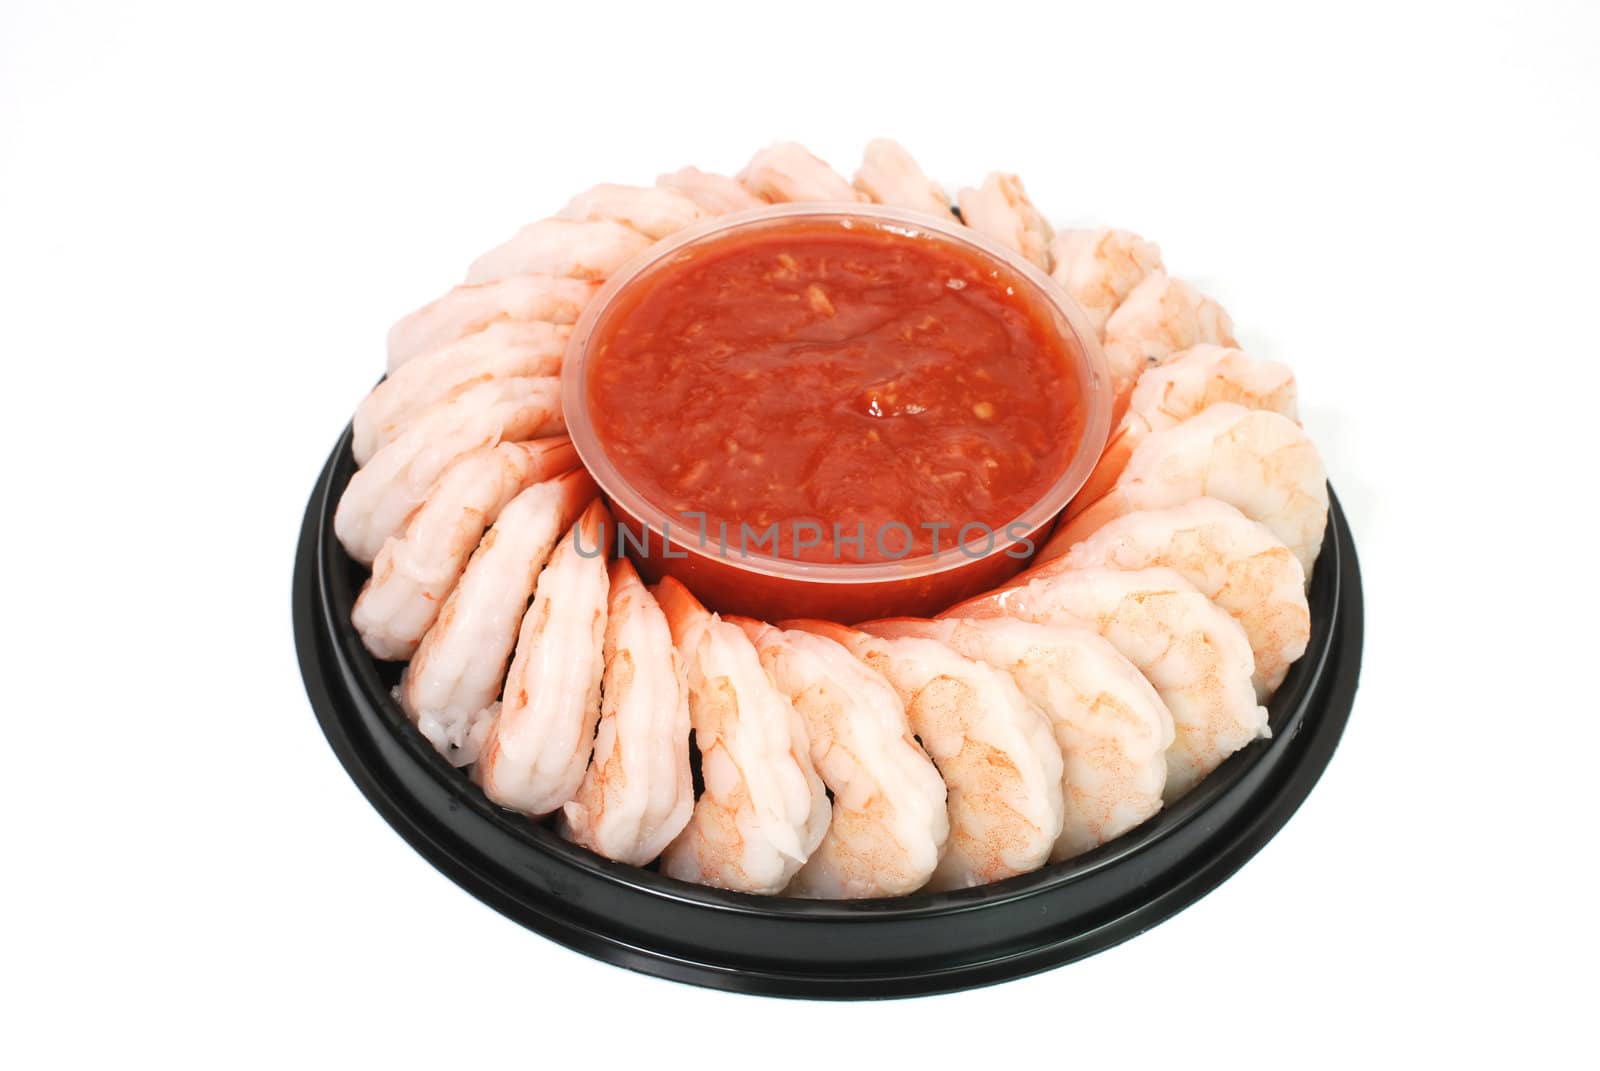 Shrimp cocktail arranged around a cup of seafood sauce.  Isolated on white background.